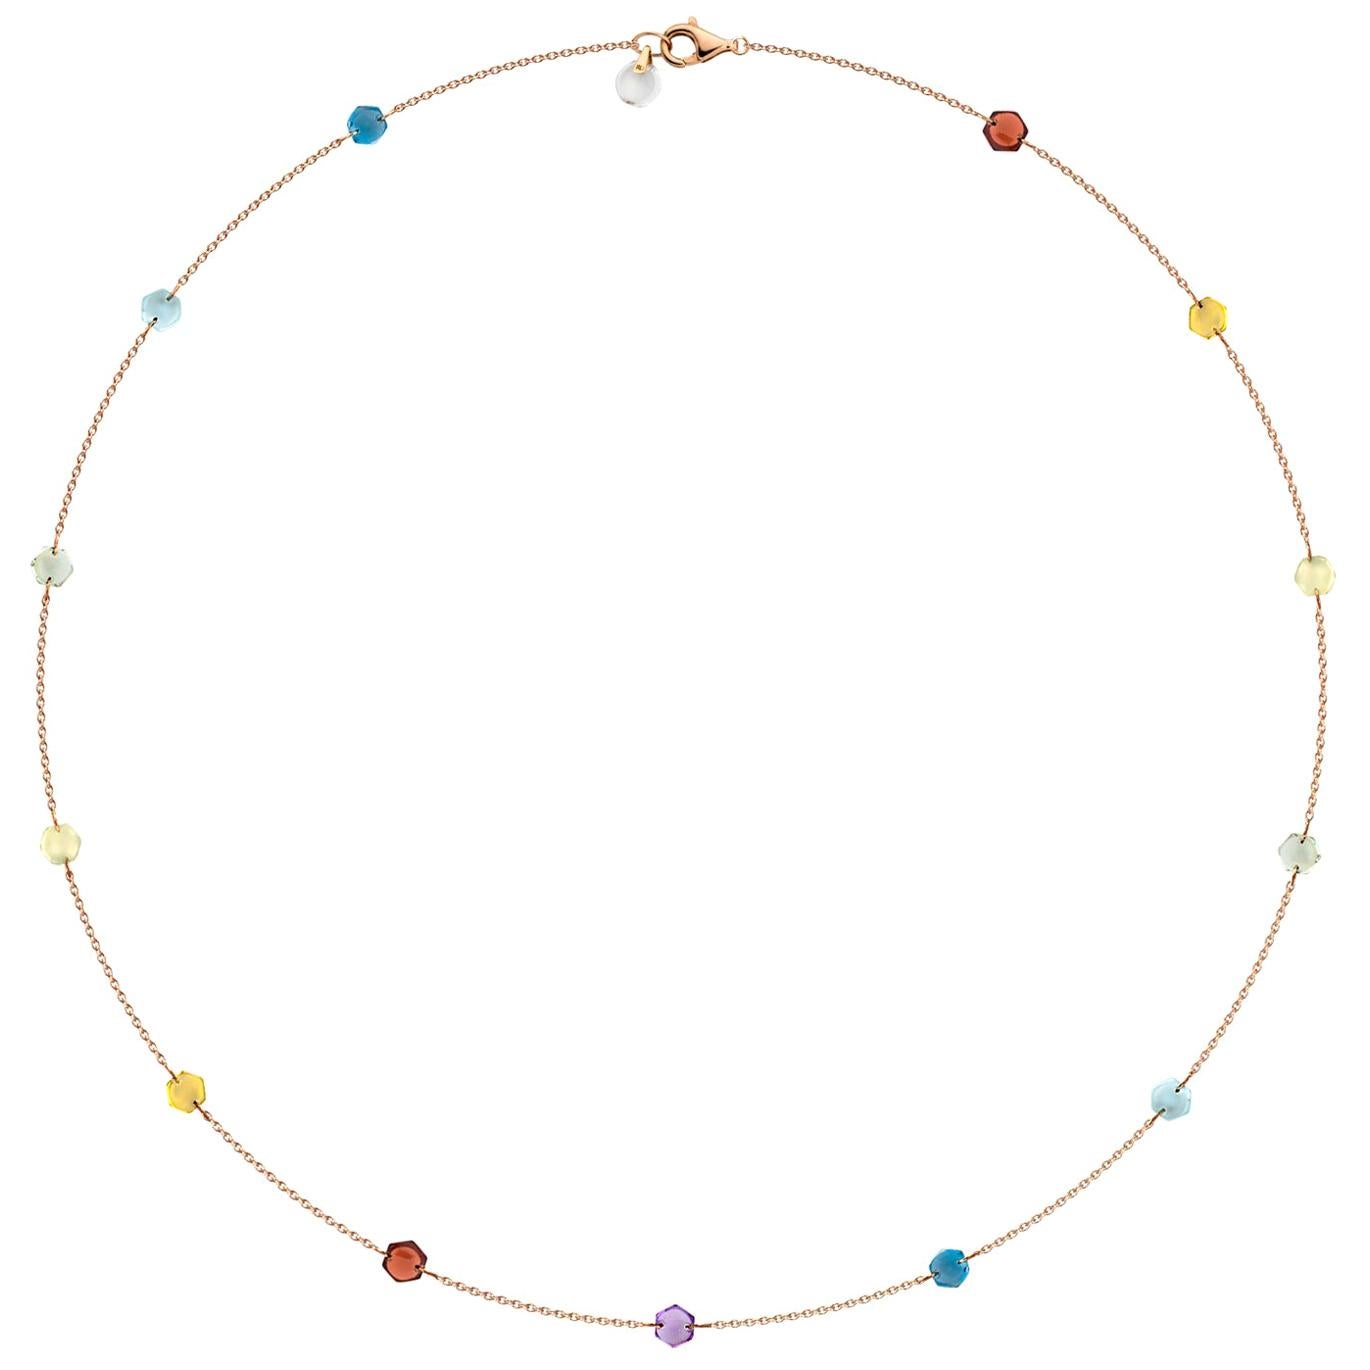 Contemporary 18 Karat Gold Link Chain with 15 Natural Rainbow Crystal Charms